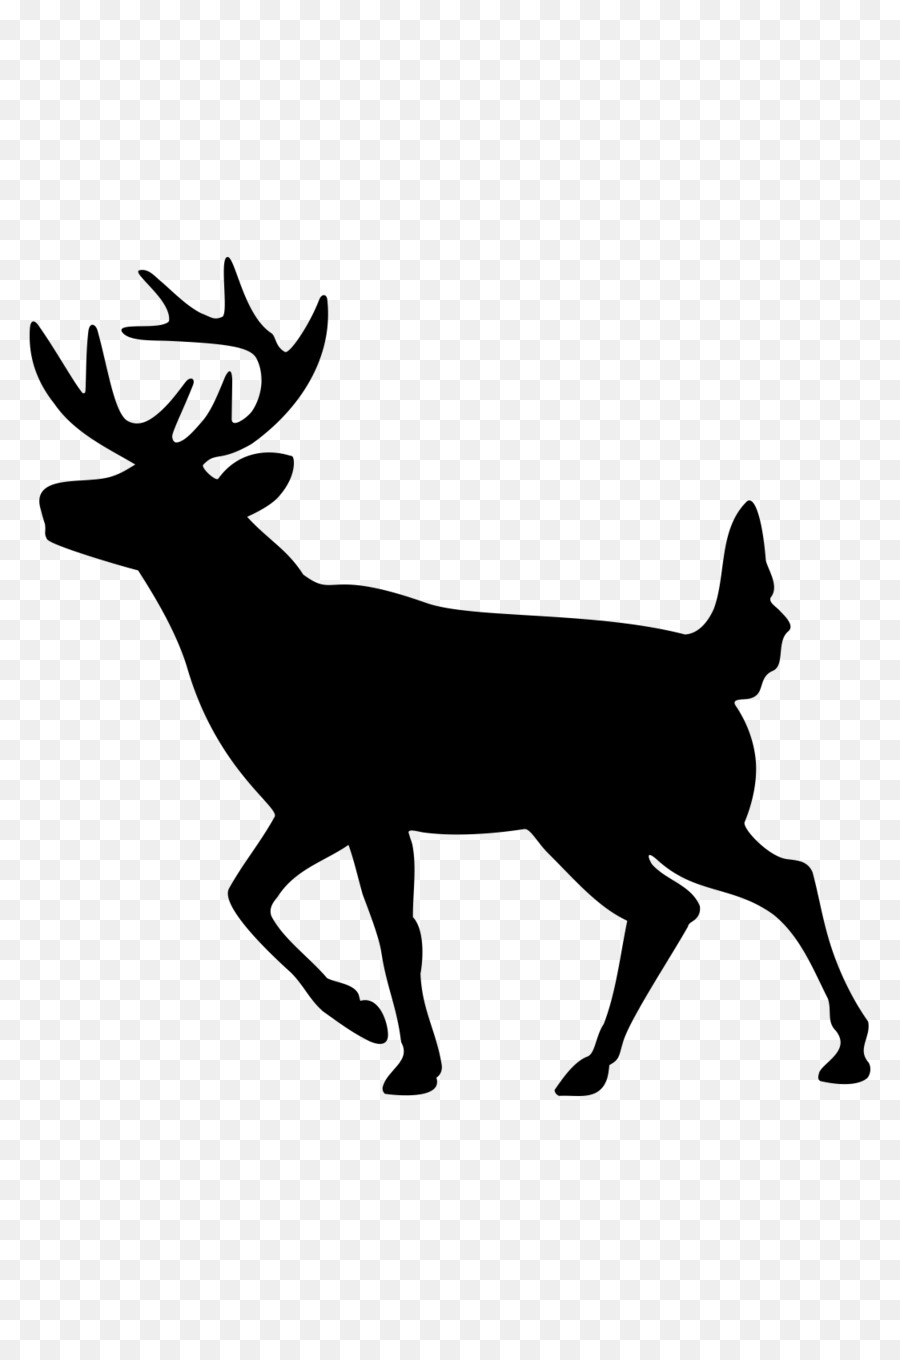 Reindeer Stock photography Image Logo Silhouette -  png download - 1124*1690 - Free Transparent Reindeer png Download.